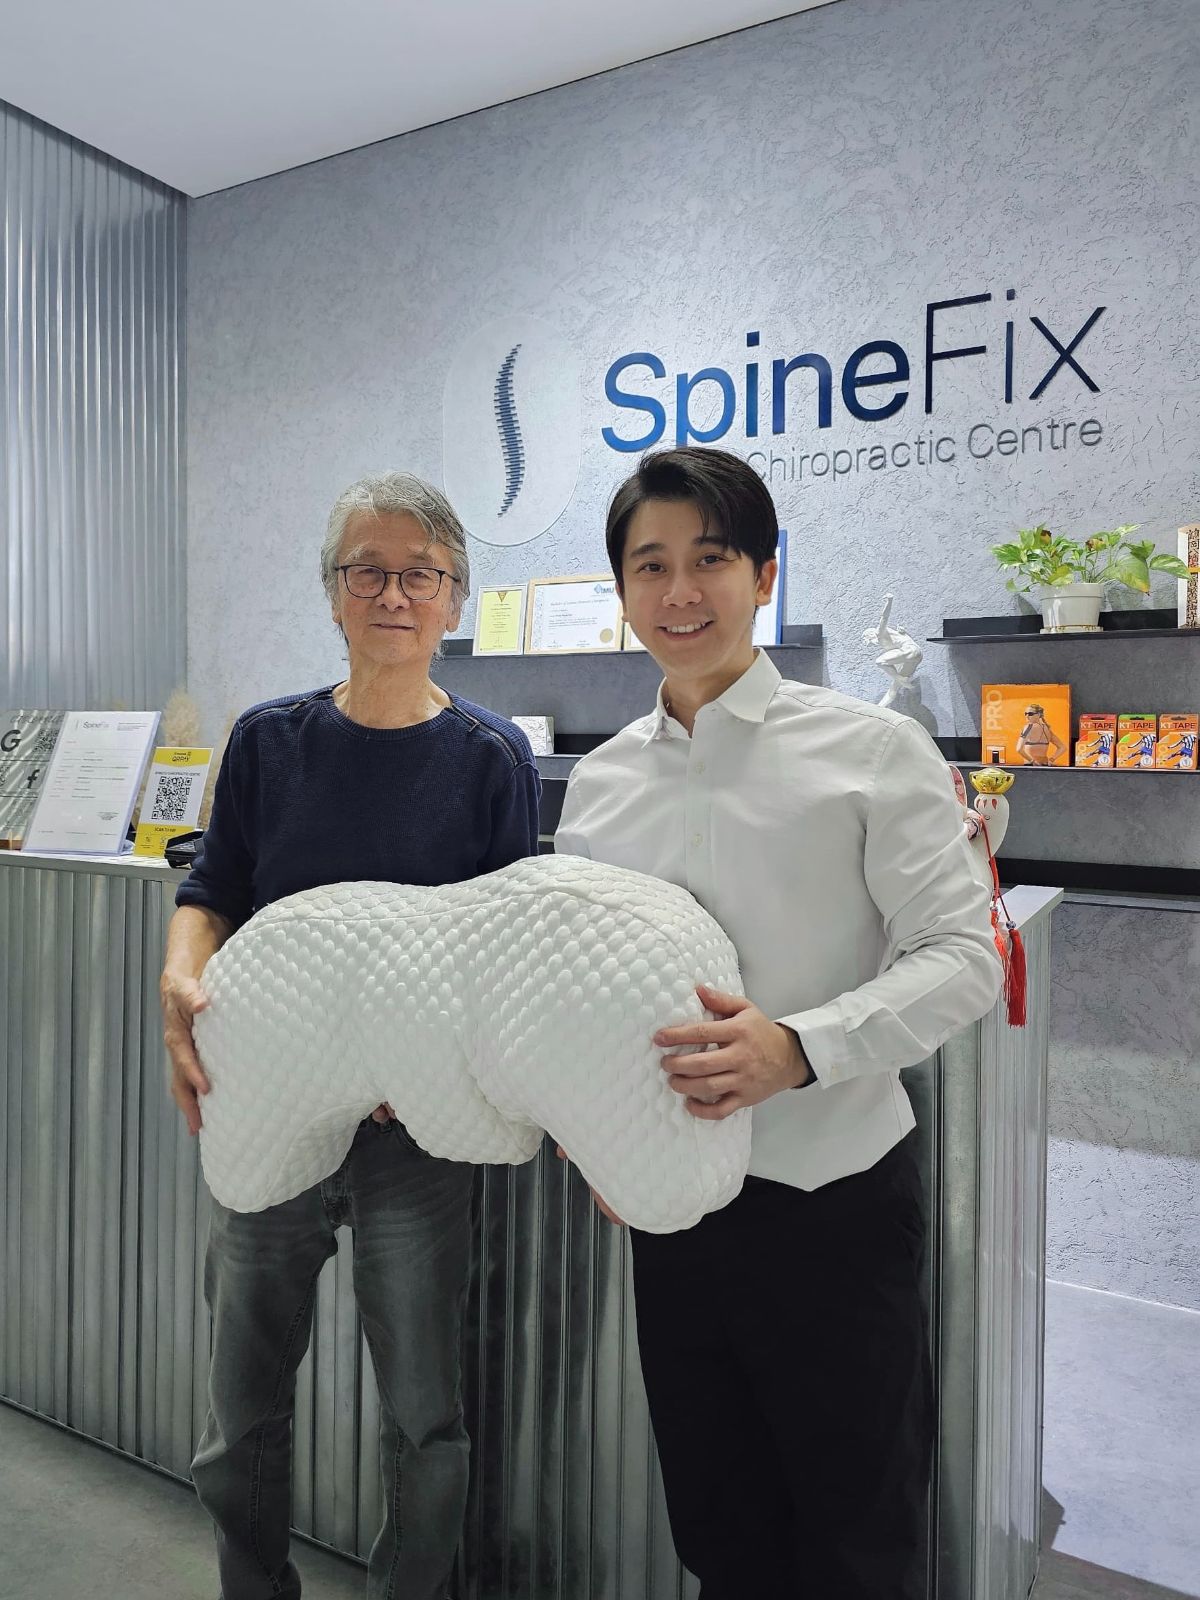 SpineFix collaboration with MPillow company